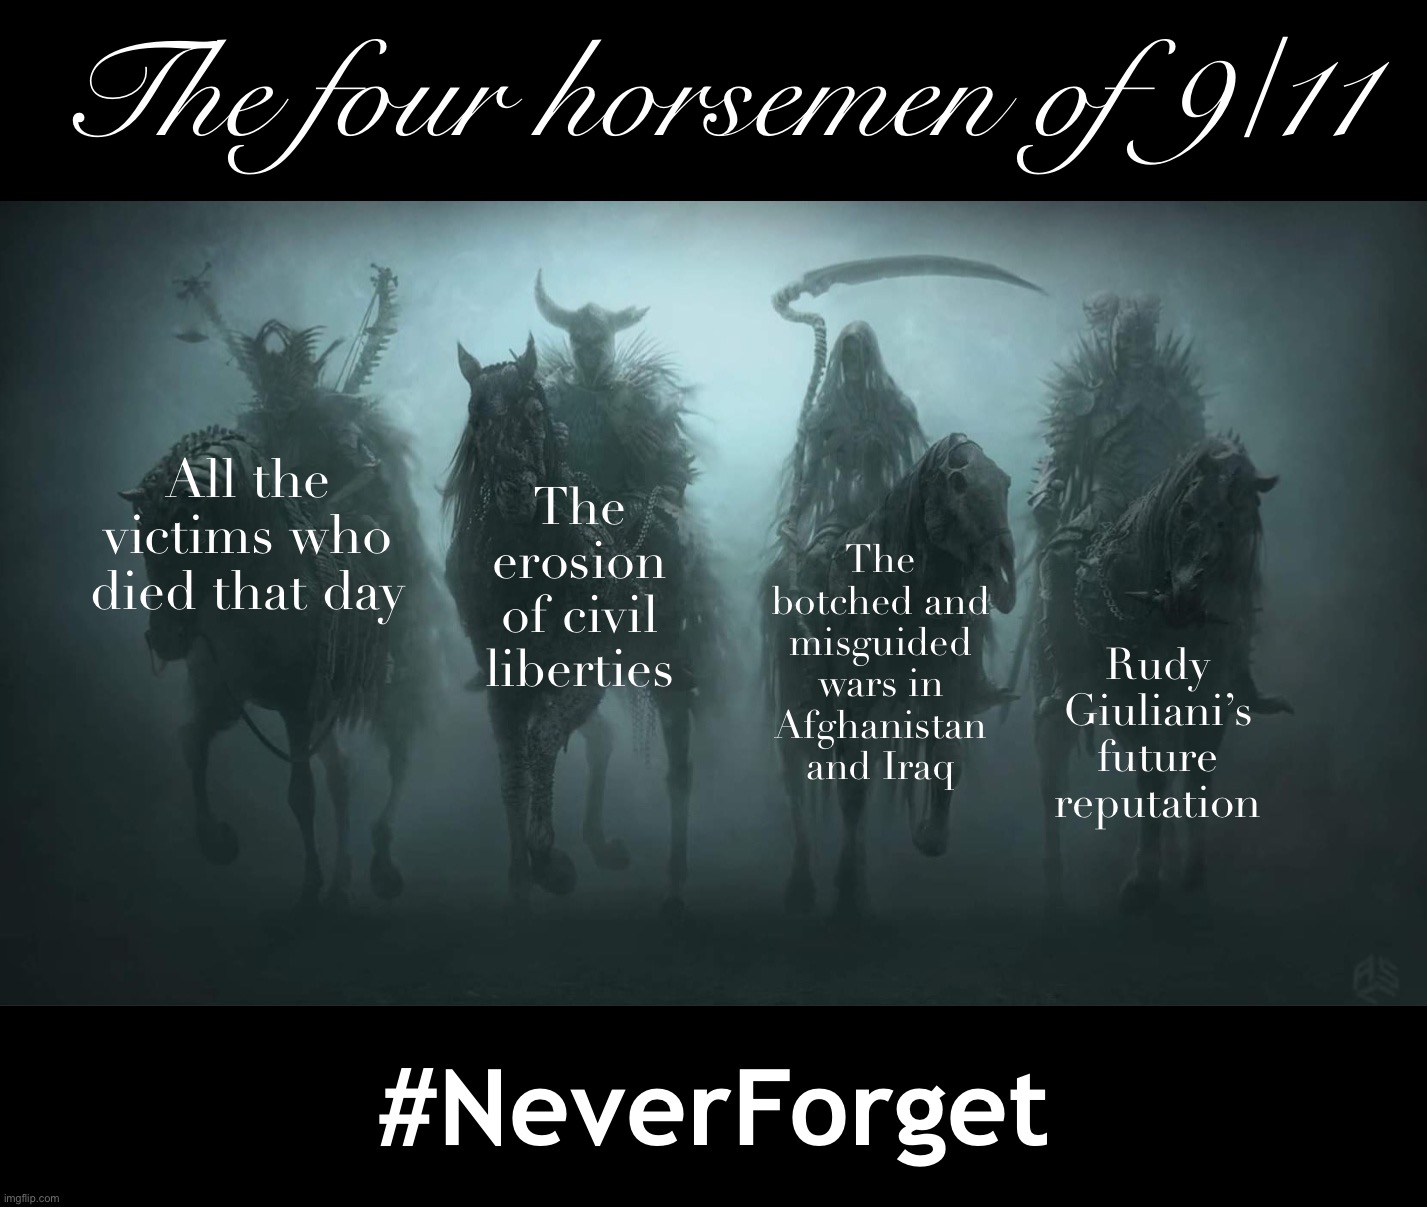 — Four casualties of 9/11 — |  The four horsemen of 9/11; All the victims who died that day; The erosion of civil liberties; The botched and misguided wars in Afghanistan and Iraq; Rudy Giuliani’s future reputation; #NeverForget | image tagged in four horsemen fixed textboxes,9/11,iraq,afghanistan,politics,rudy giuliani | made w/ Imgflip meme maker